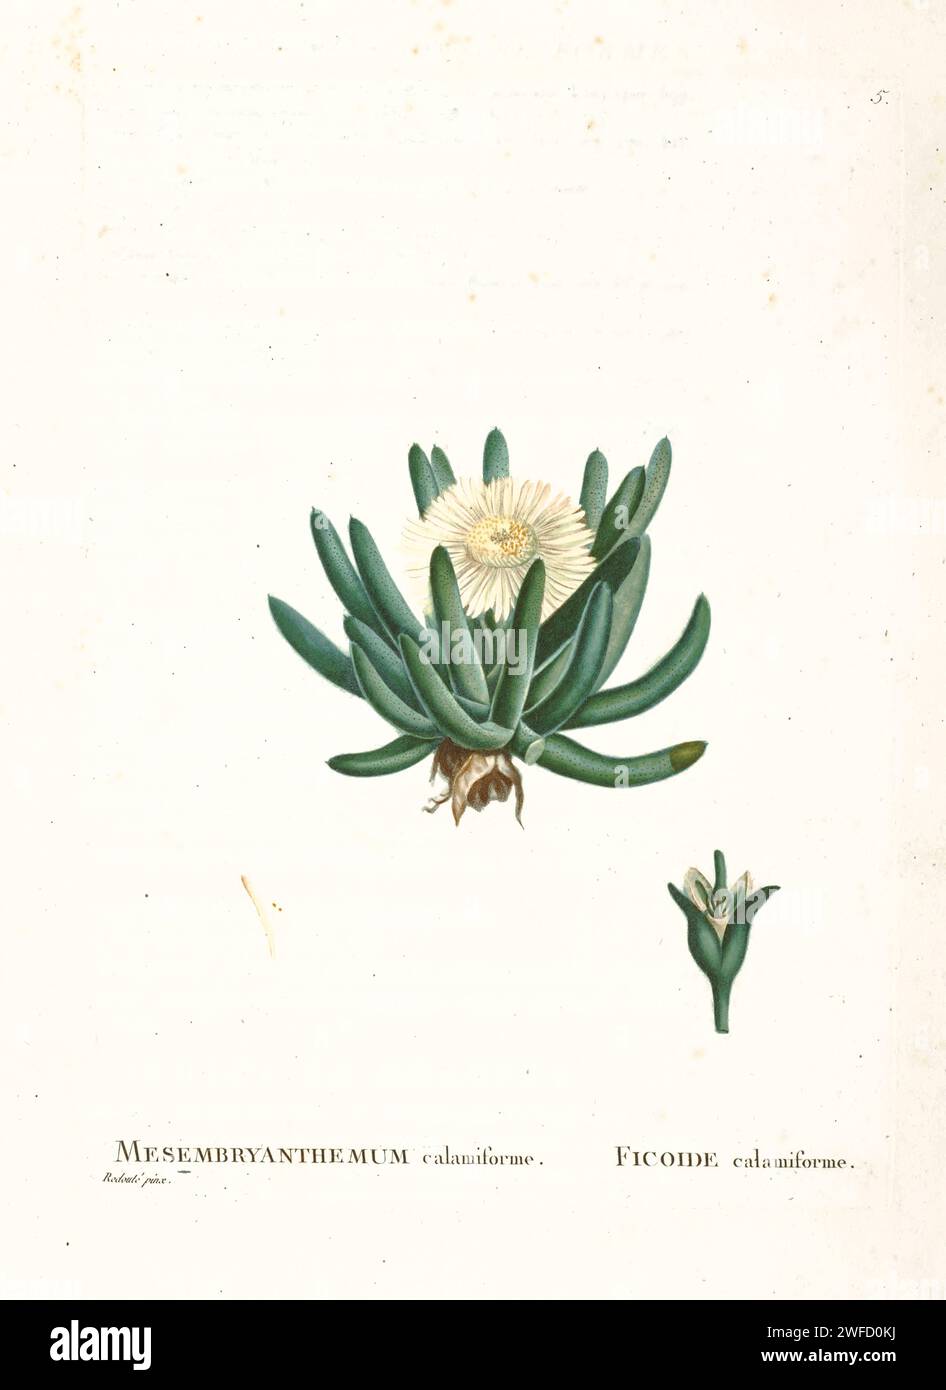 Cylindrophyllum calamiforme (L) Schwant. Here As Mesembryanthemum calamiforme from History of Succulent Plants [Plantarum historia succulentarum / Histoire des plantes grasses] painted by Pierre-Joseph Redouté and described by Augustin Pyramus de Candolle Stock Photo